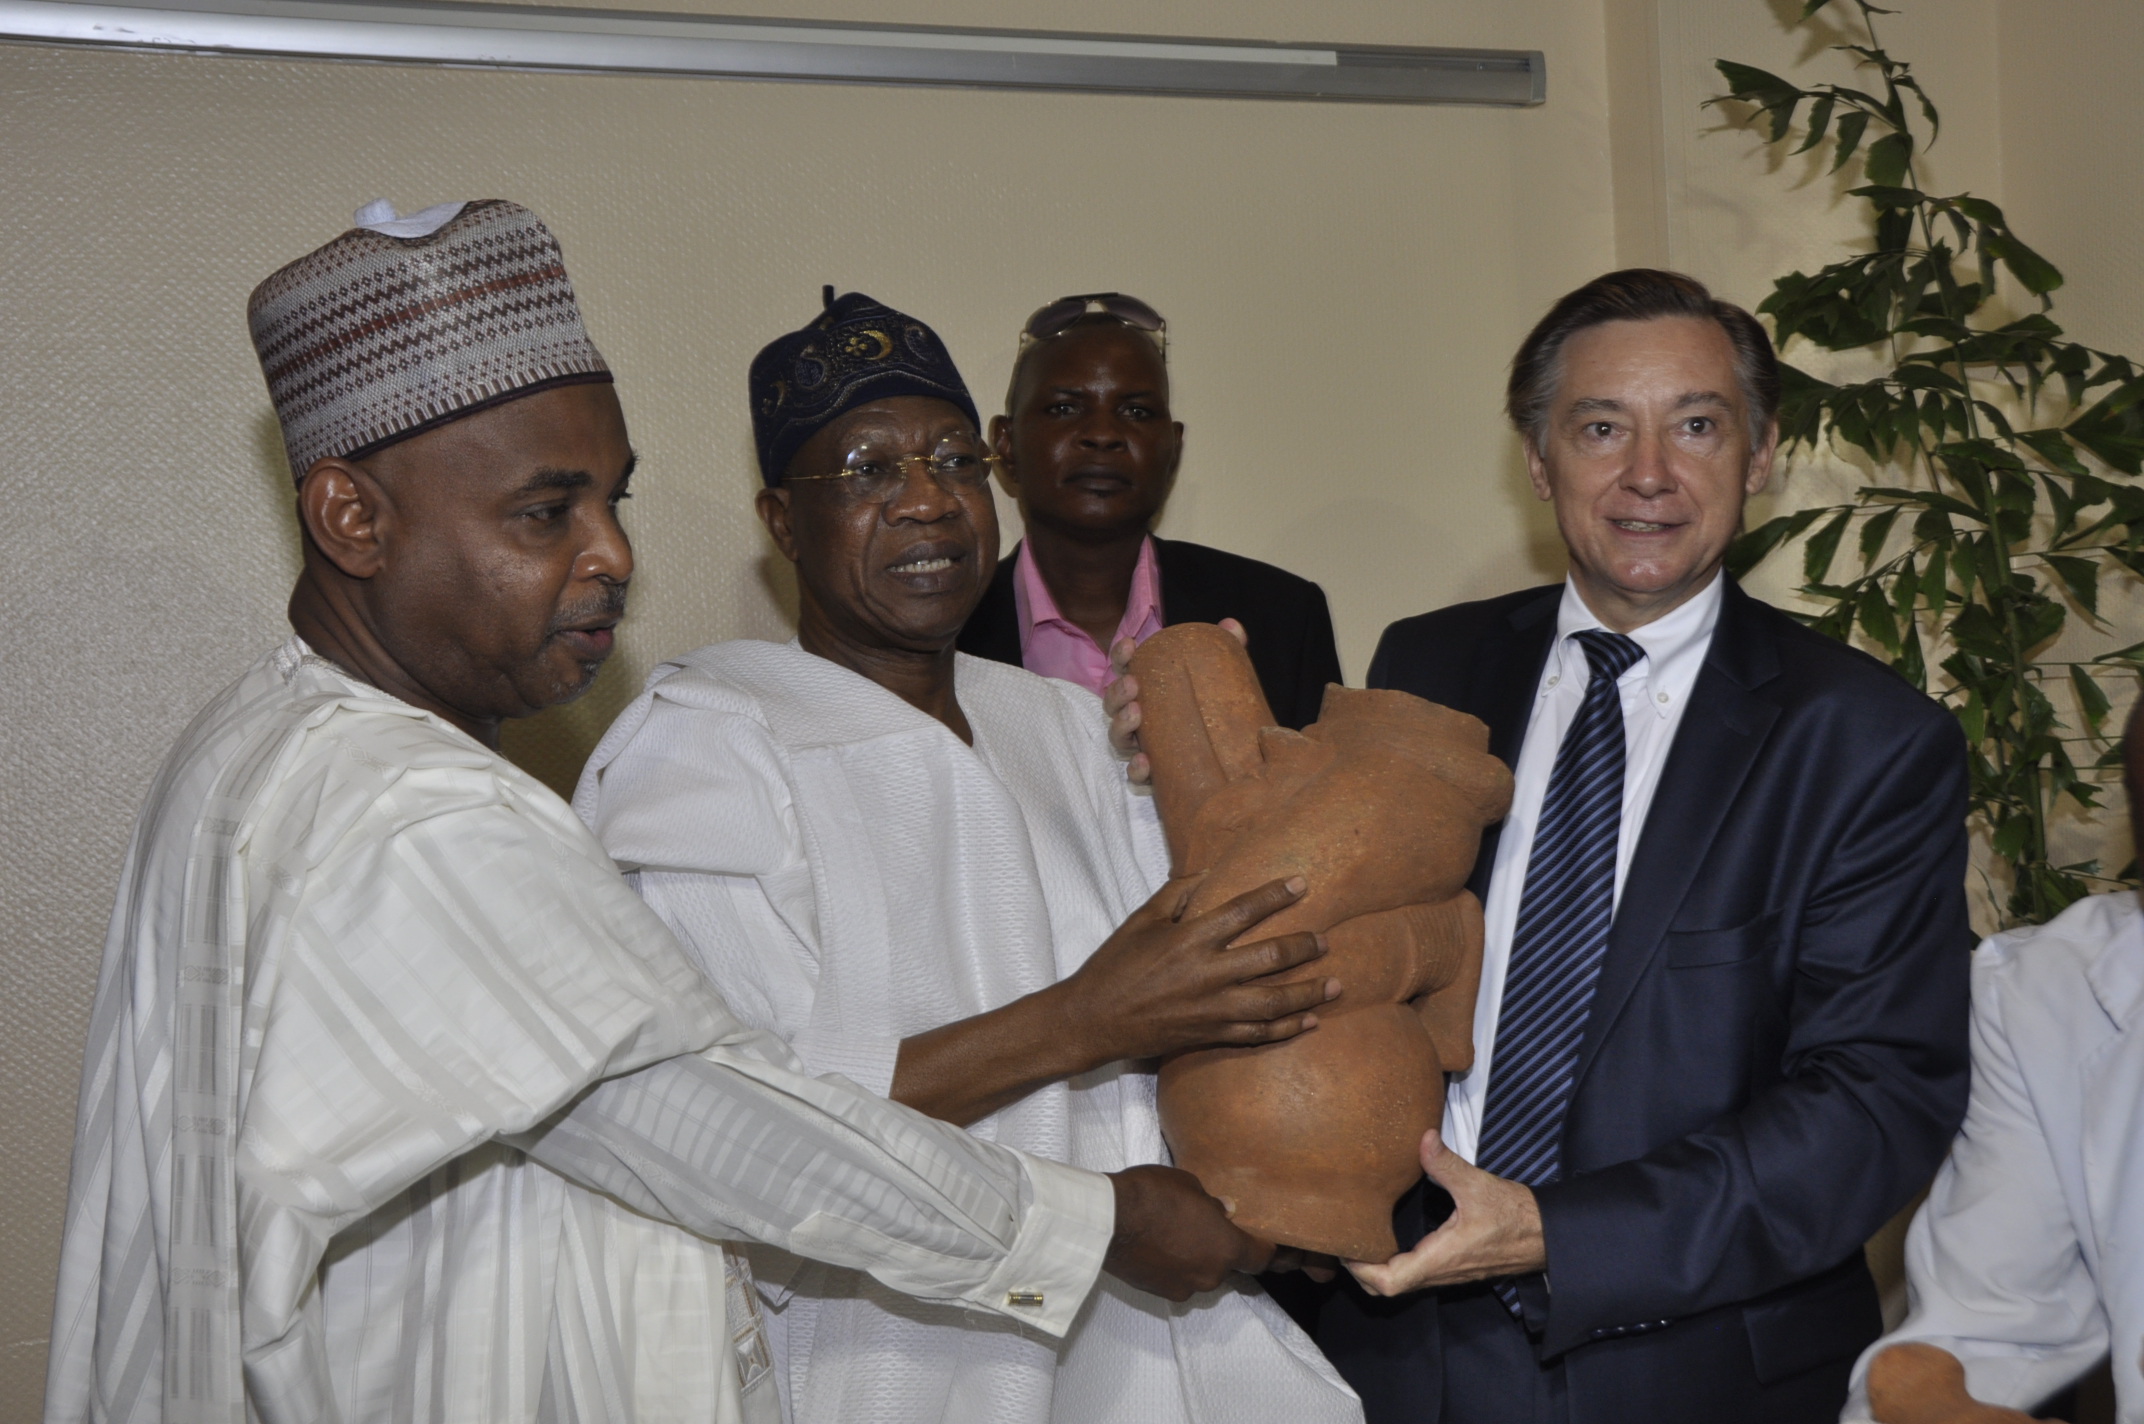 French Ambassador to Nigeria, Mr. Denys Gauer presenting the Nok Terracotta to the Minister of Information and Culture, Alhaji Lai Mohammed and the Director General, National Commission for Museums and Monuments, Yusuf Abdallah, at the 2016 International Museums Day Celebration in Abuja on Wednesday.